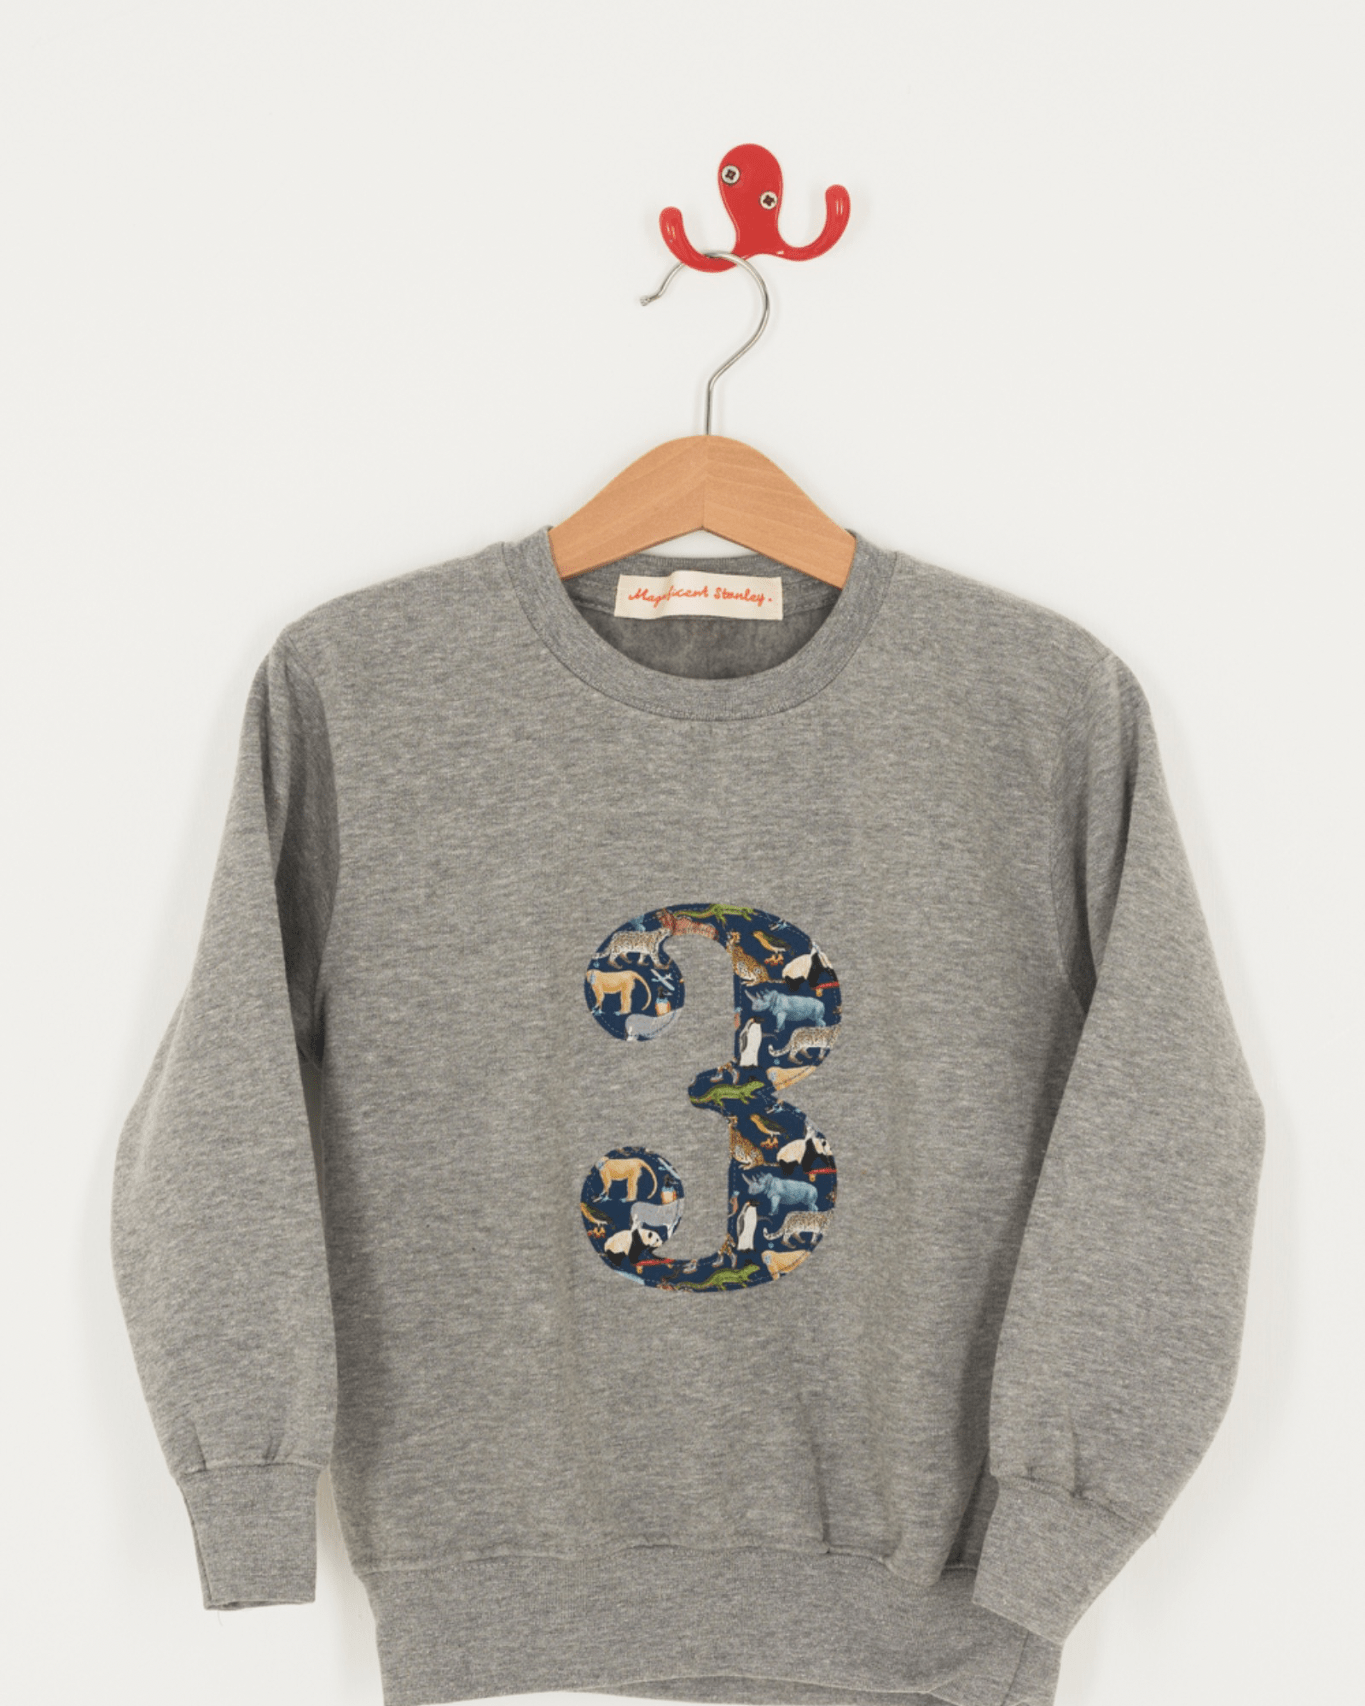 Magnificent Stanley sweatshirt CREATE YOUR OWN Personalised or Age Grey Sweatshirt